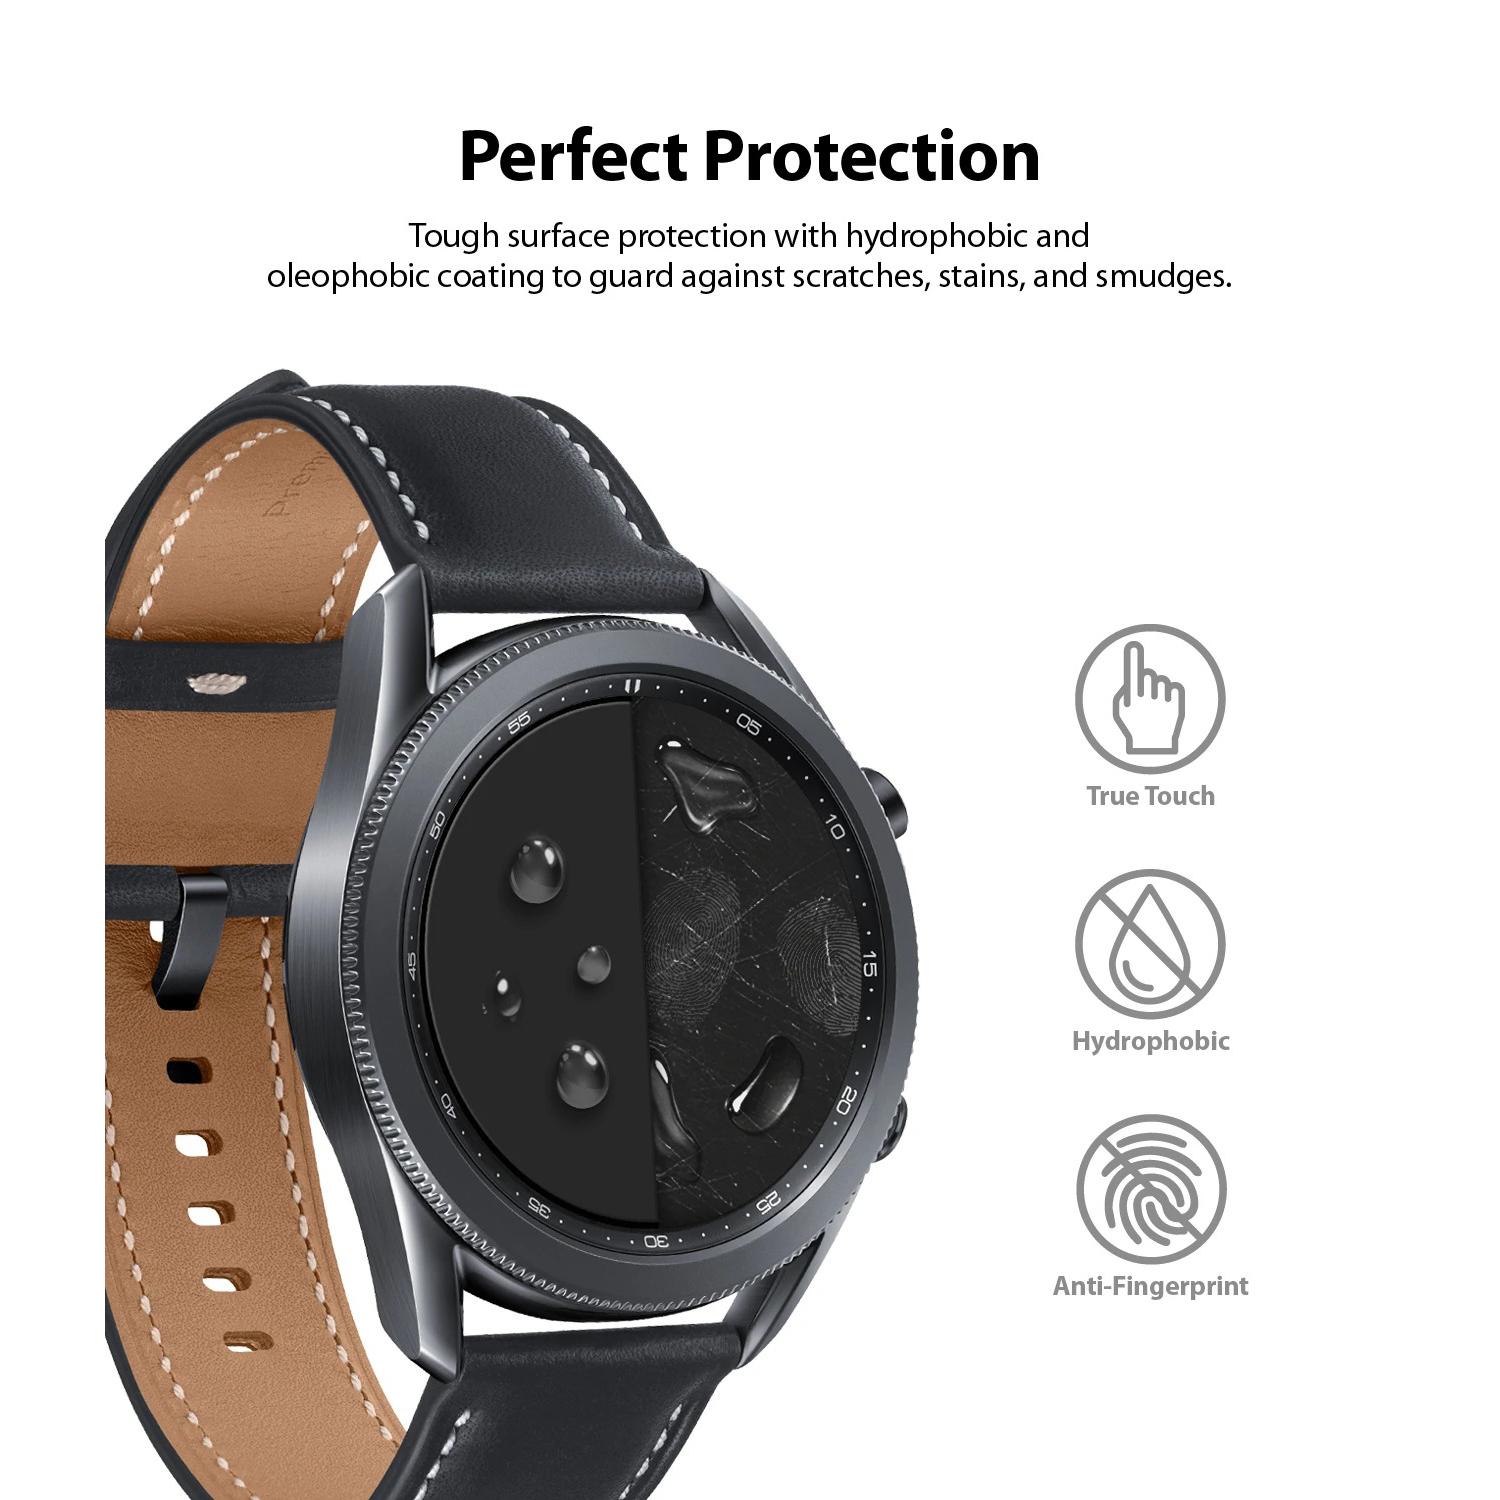 Screen Tempered Glass Galaxy Watch 3 45mm (4-pack)